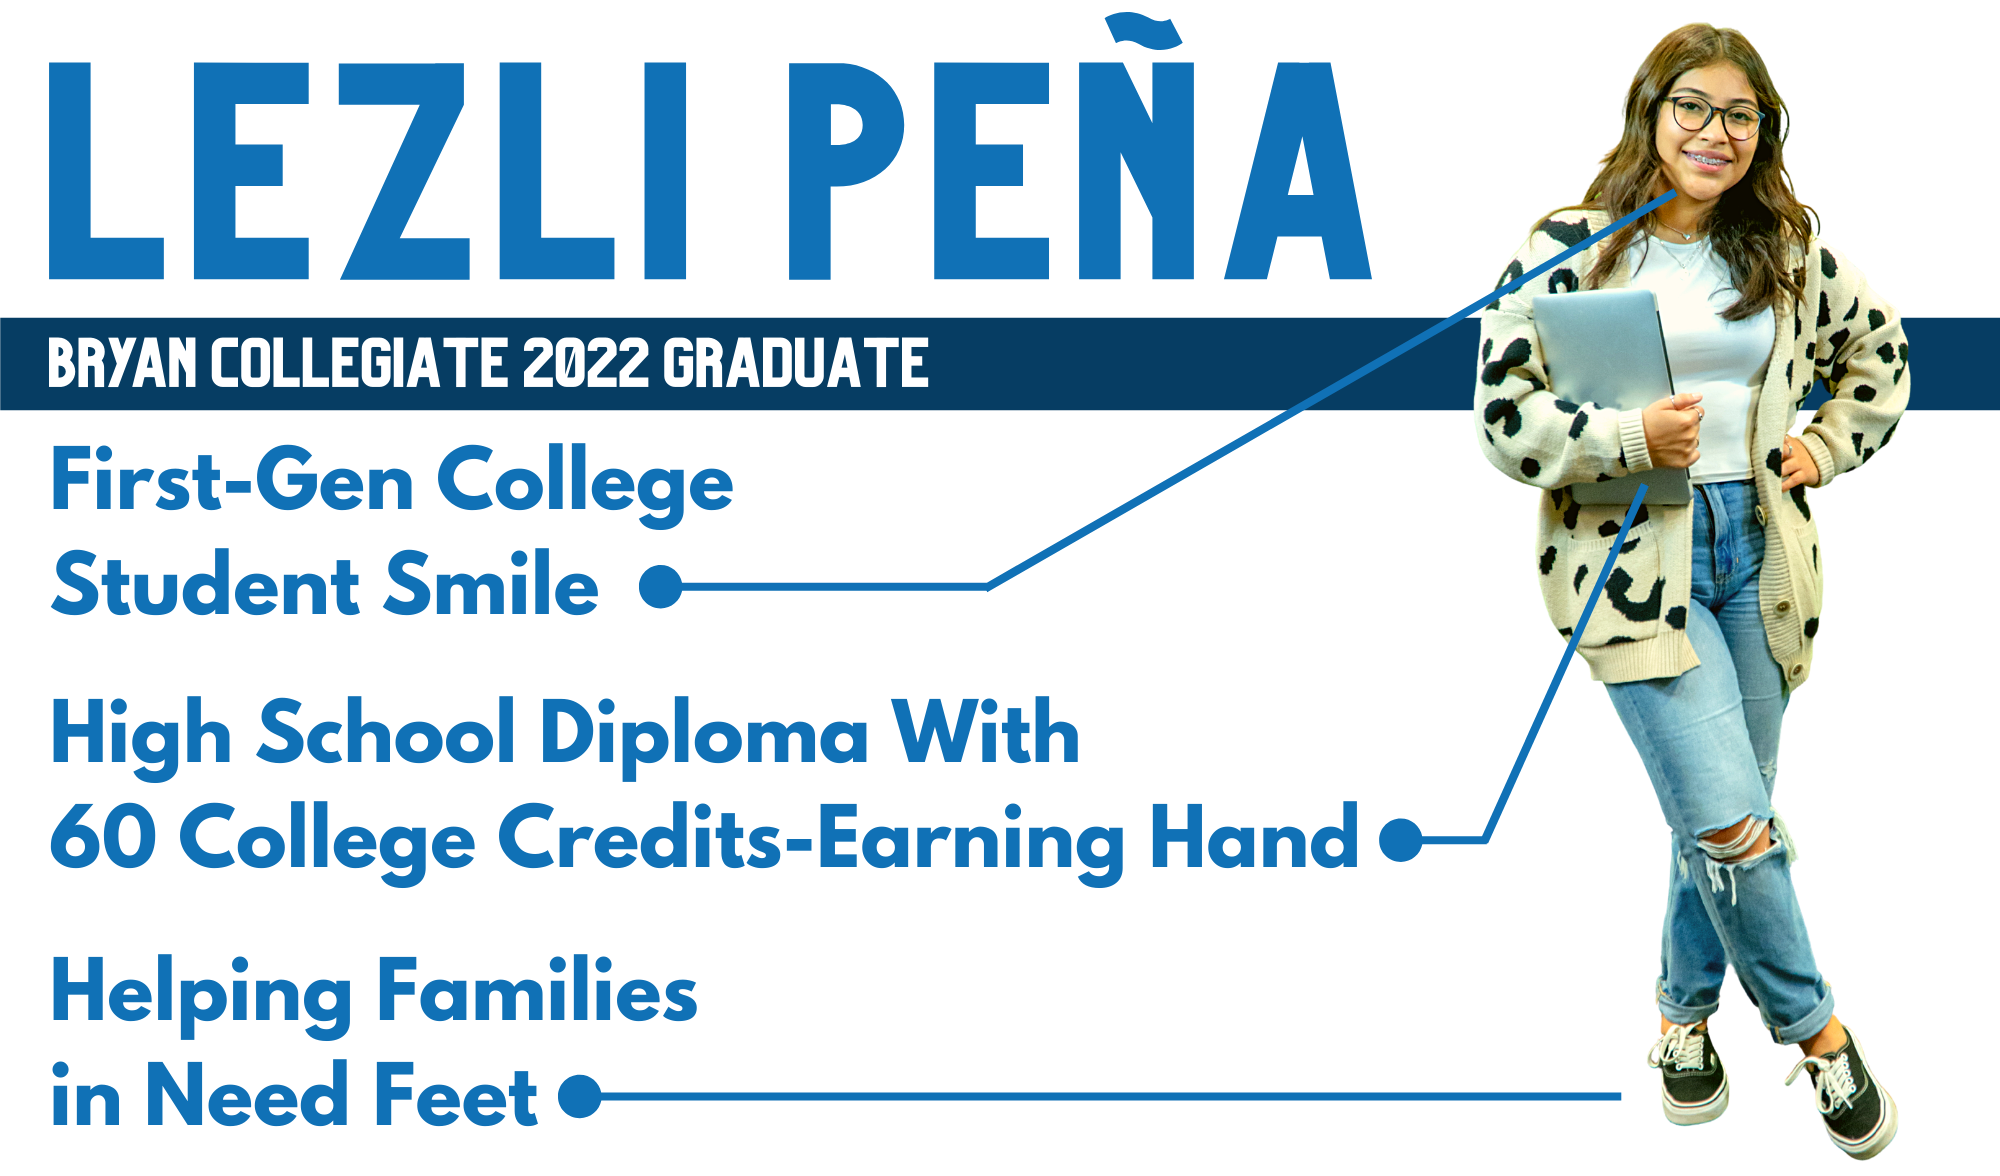 Meet Lezli Peña Bryan Collegiate 2022 Graduate. First Gen College Student Smile. HIgh School Diploma with 60 College Credits Earning Hand Helping Families in need feet